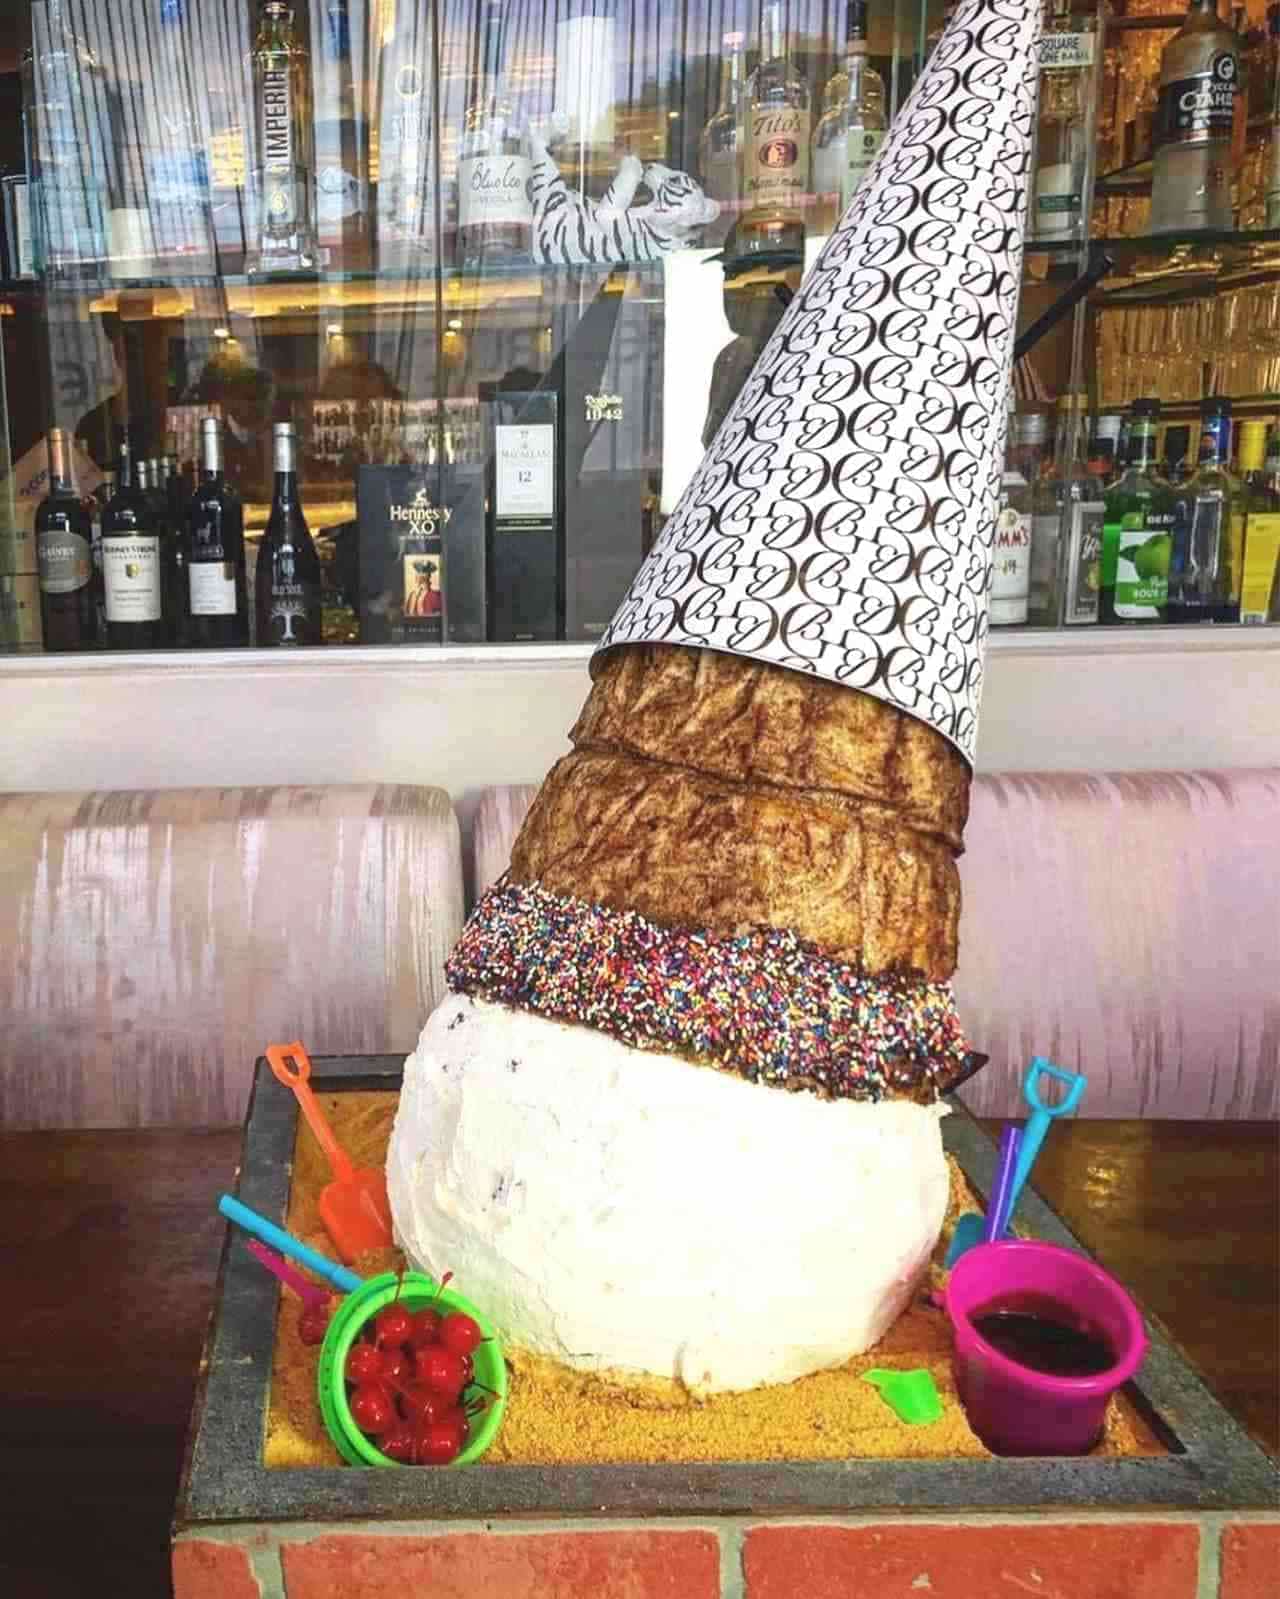 An ice cream dessert weighing 11 kg "I've dropped the ice cream"